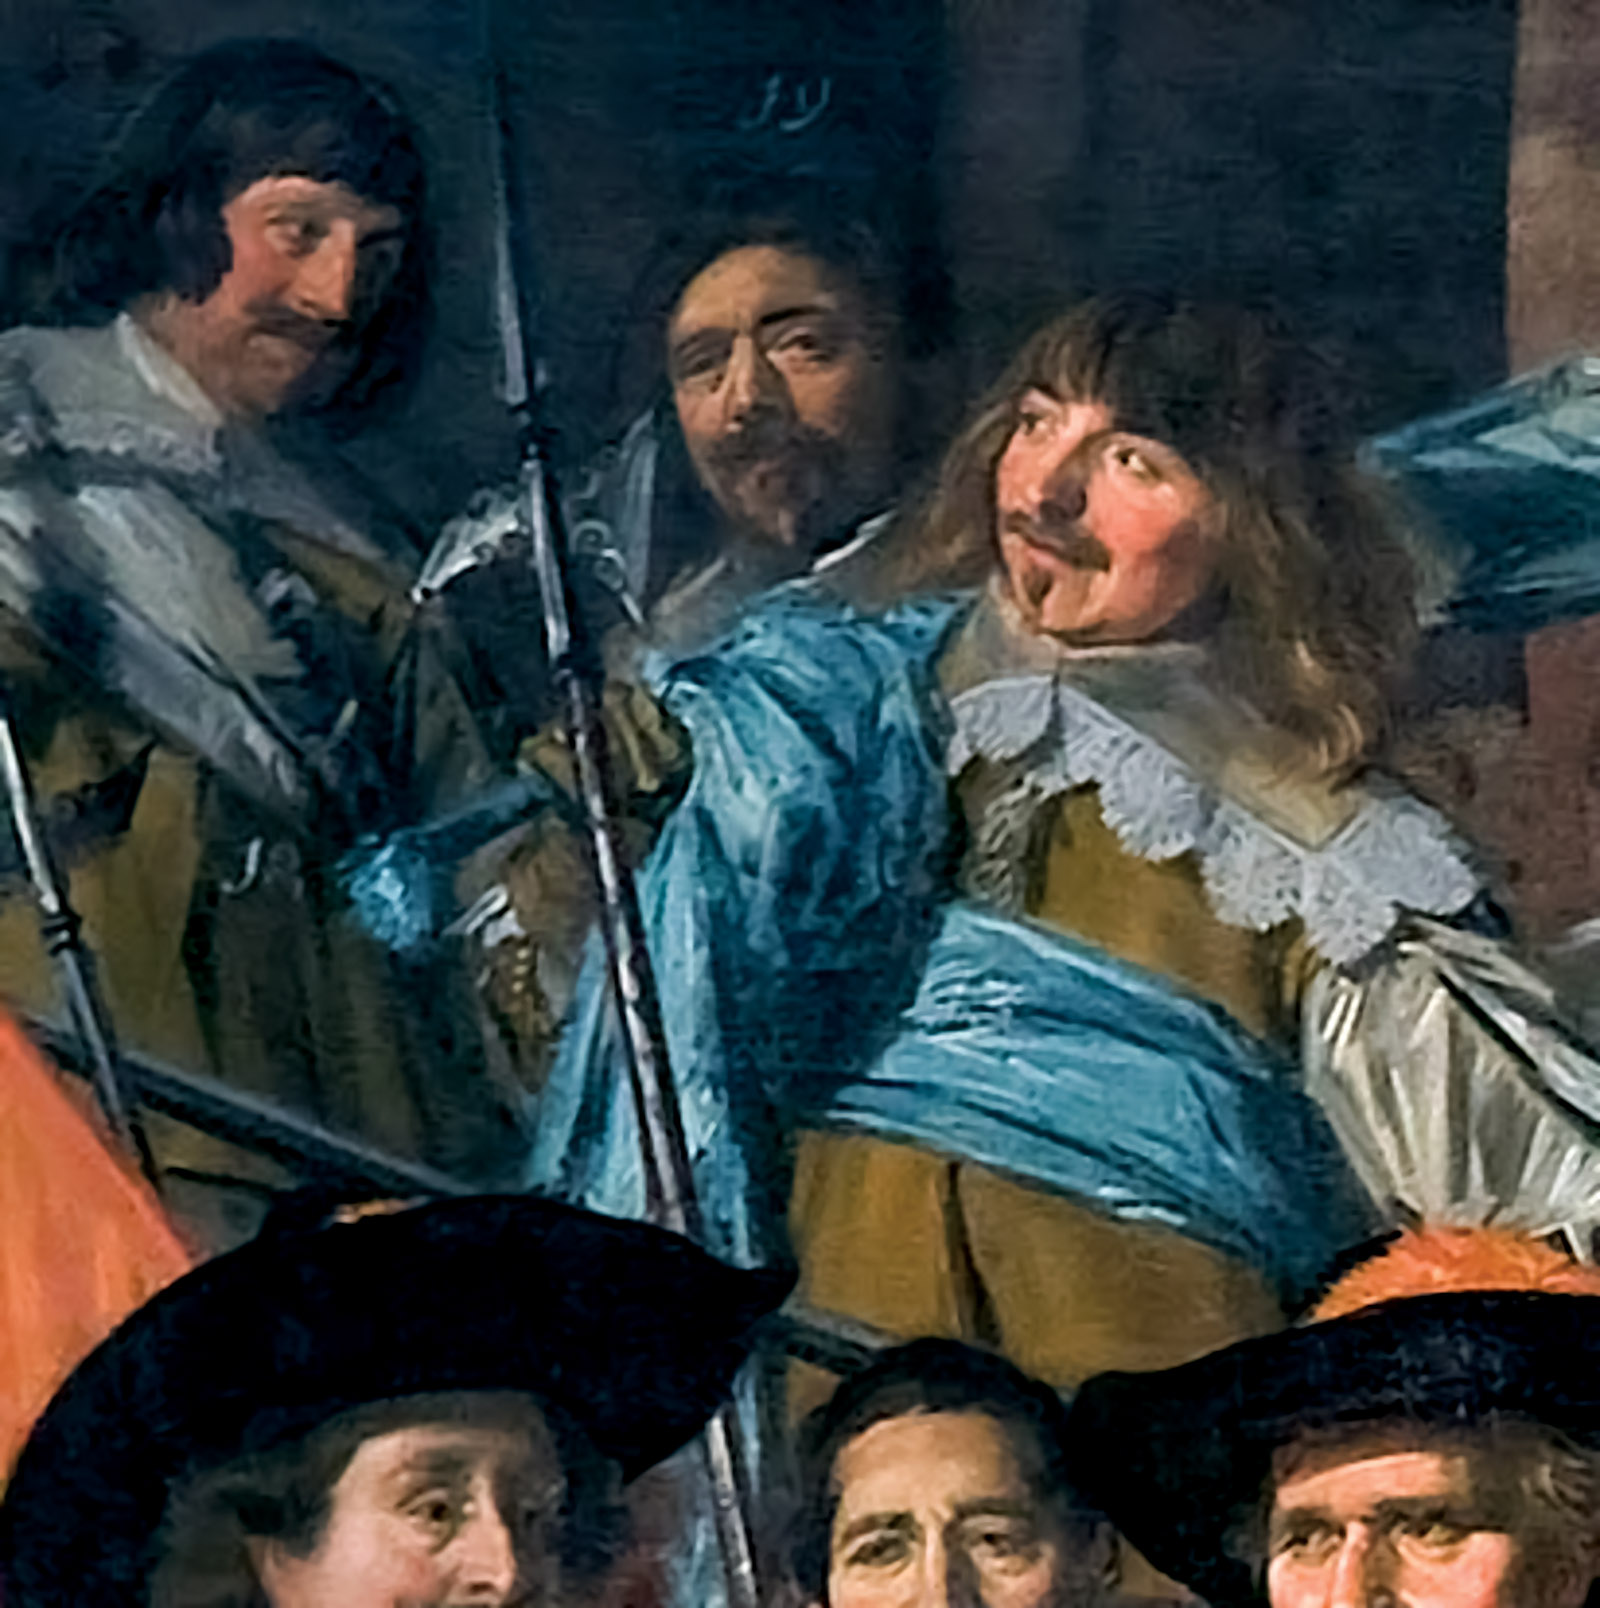 Officers and Sergeants of the St. George Civic Guard; painting by Frans Hals, the center figure is believed to be a self-portrait of Hals